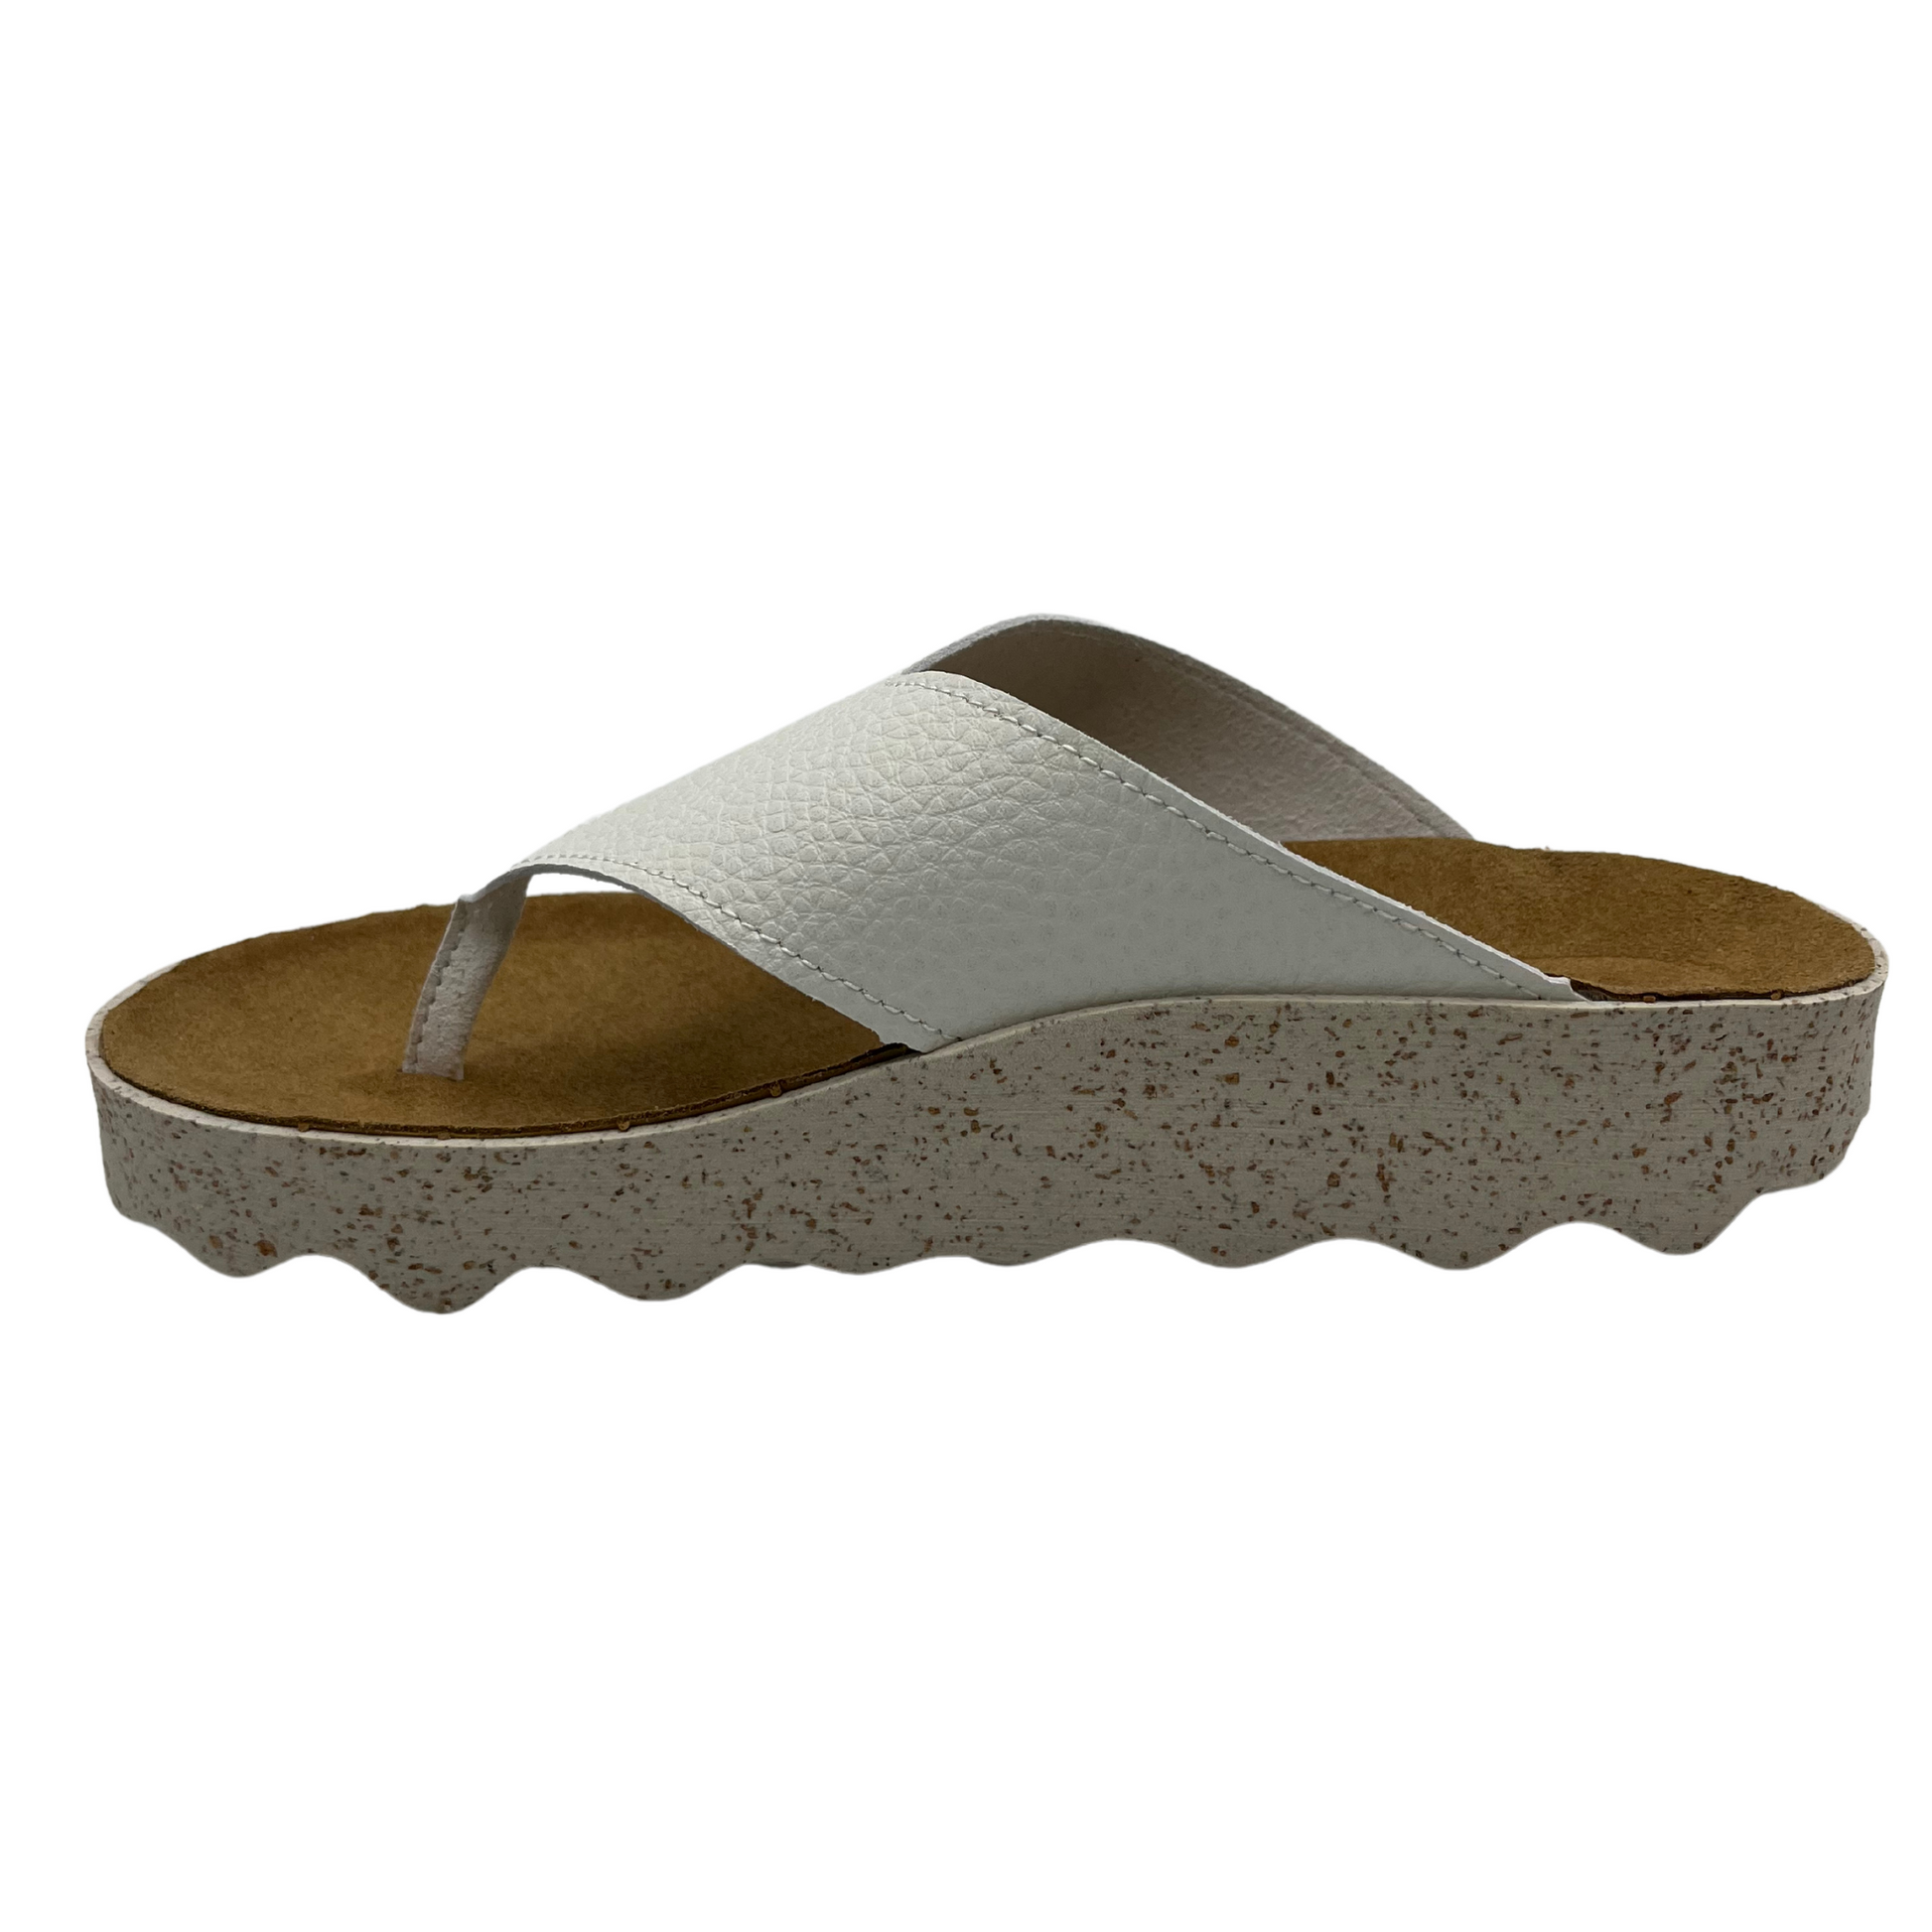 Left facing view of white strapped thong sandal with brown contoured footbed and white speckled outsole